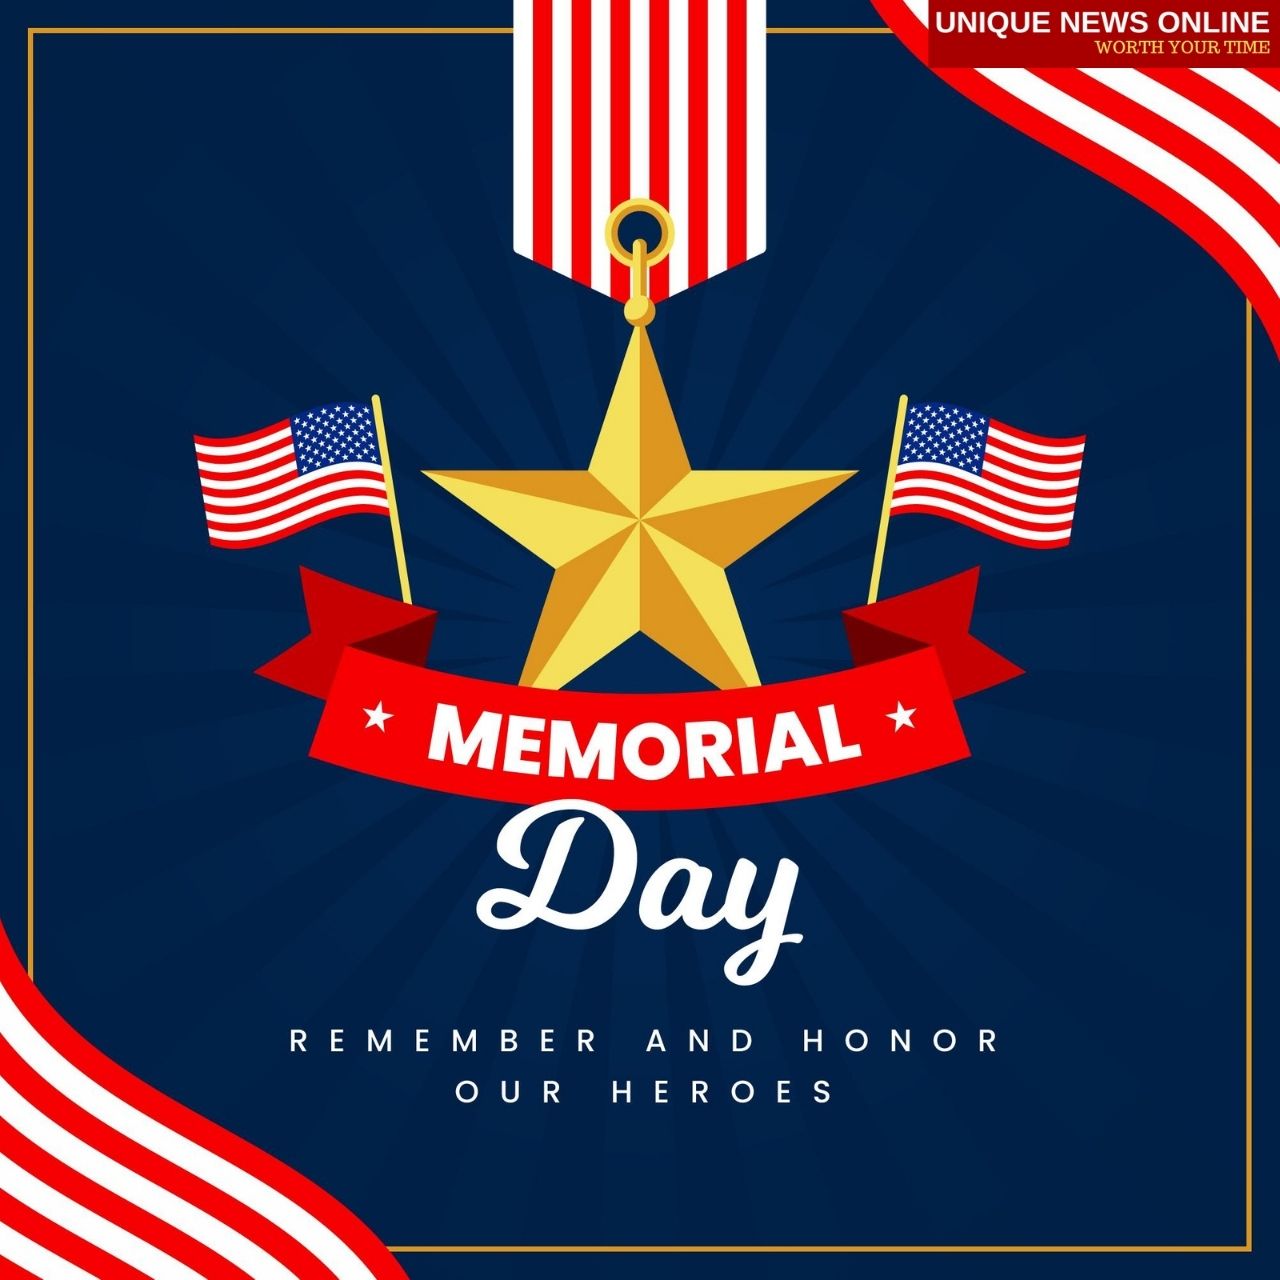 National Memorial Day 2021: Poster, Wishes, Images, Greetings, Quotes, and Messages to Share